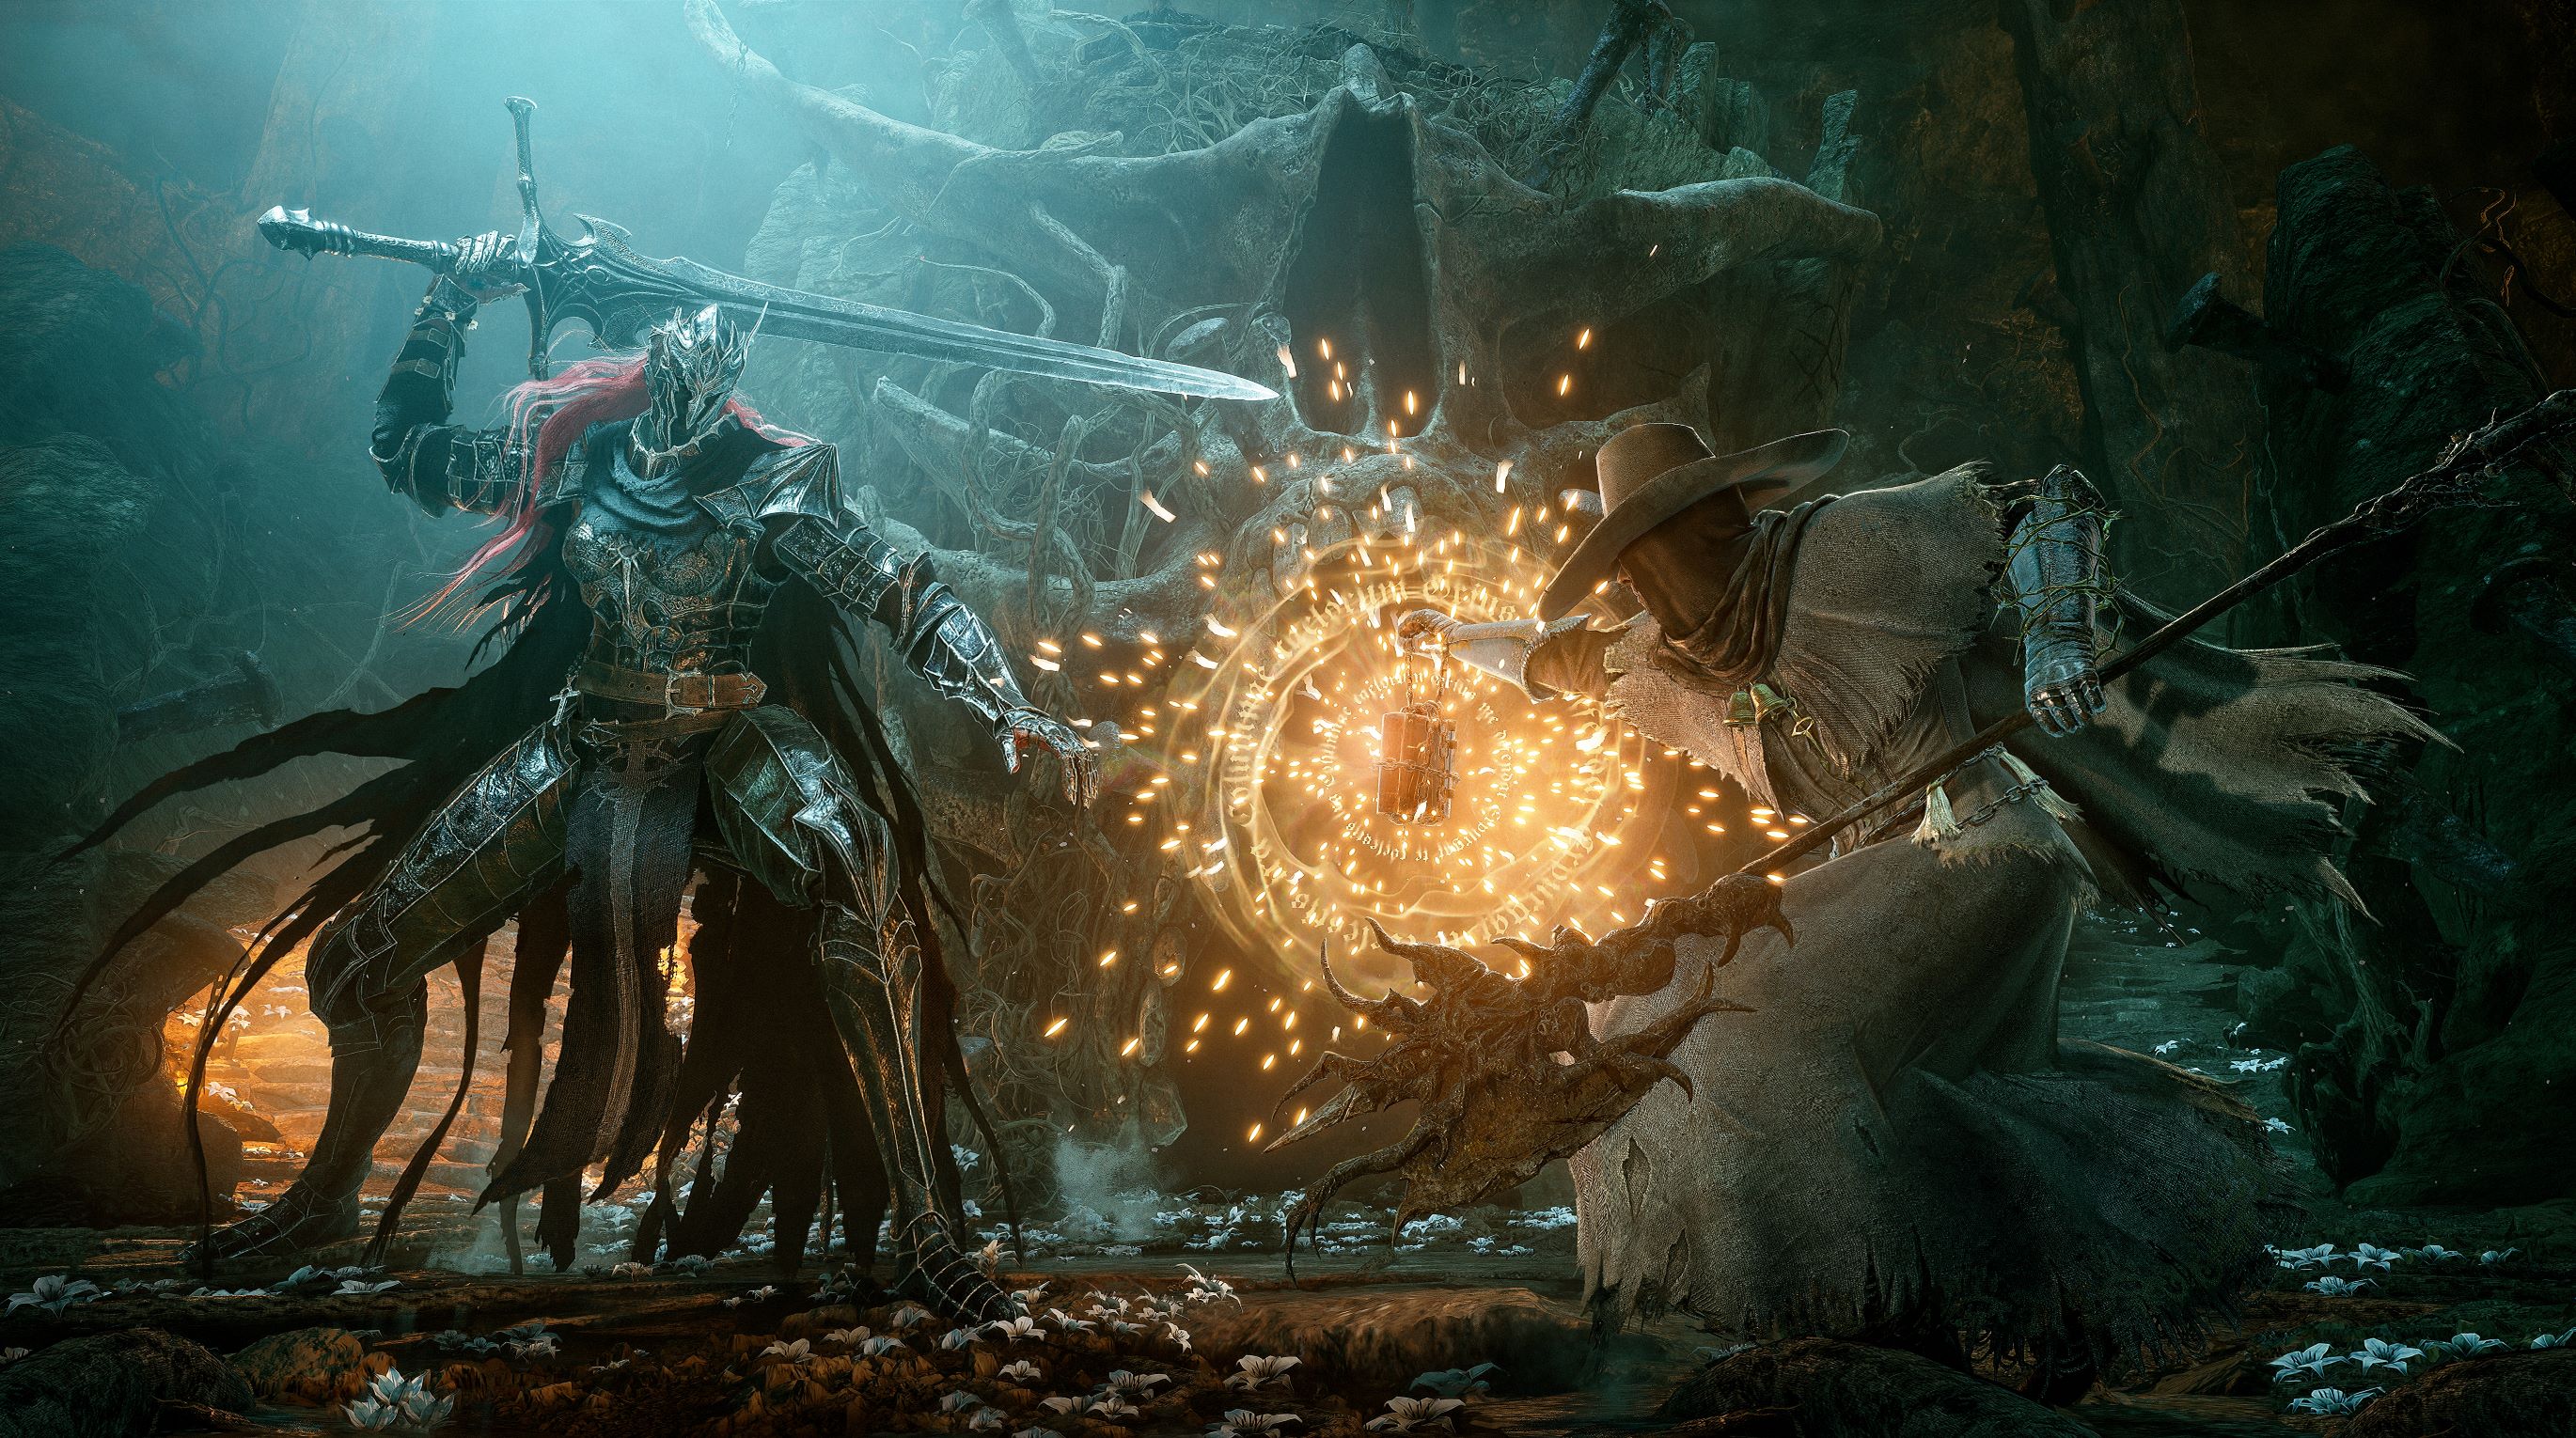 A cleric fights a boss in Lords of the Fallen.